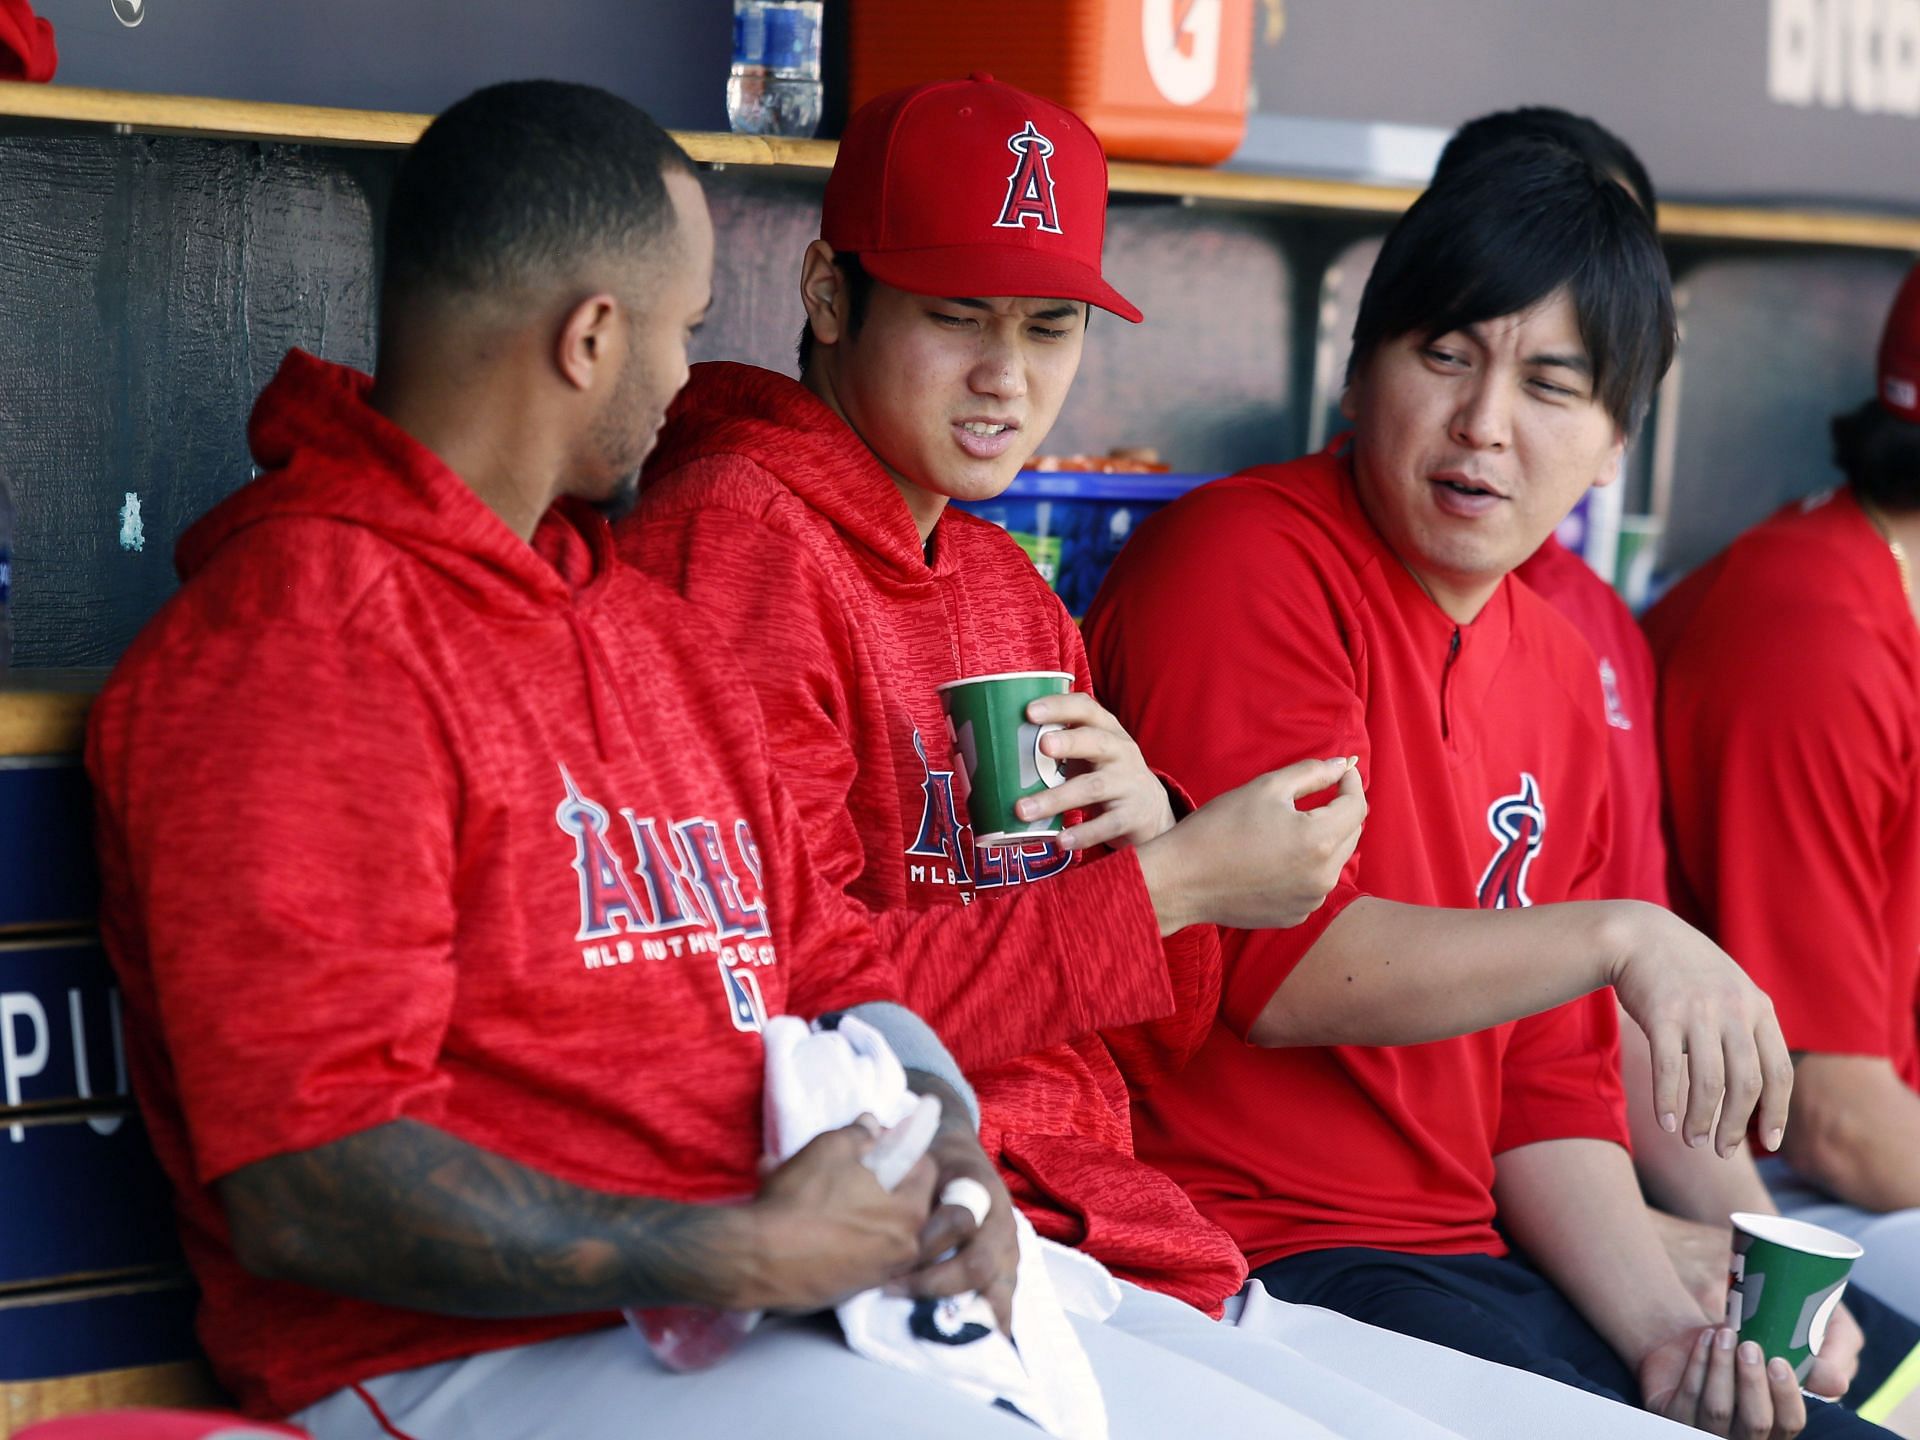 Los Angeles Angels interpetter Ippei Mizuhara has been with the team since Shohei Ohtani arrived